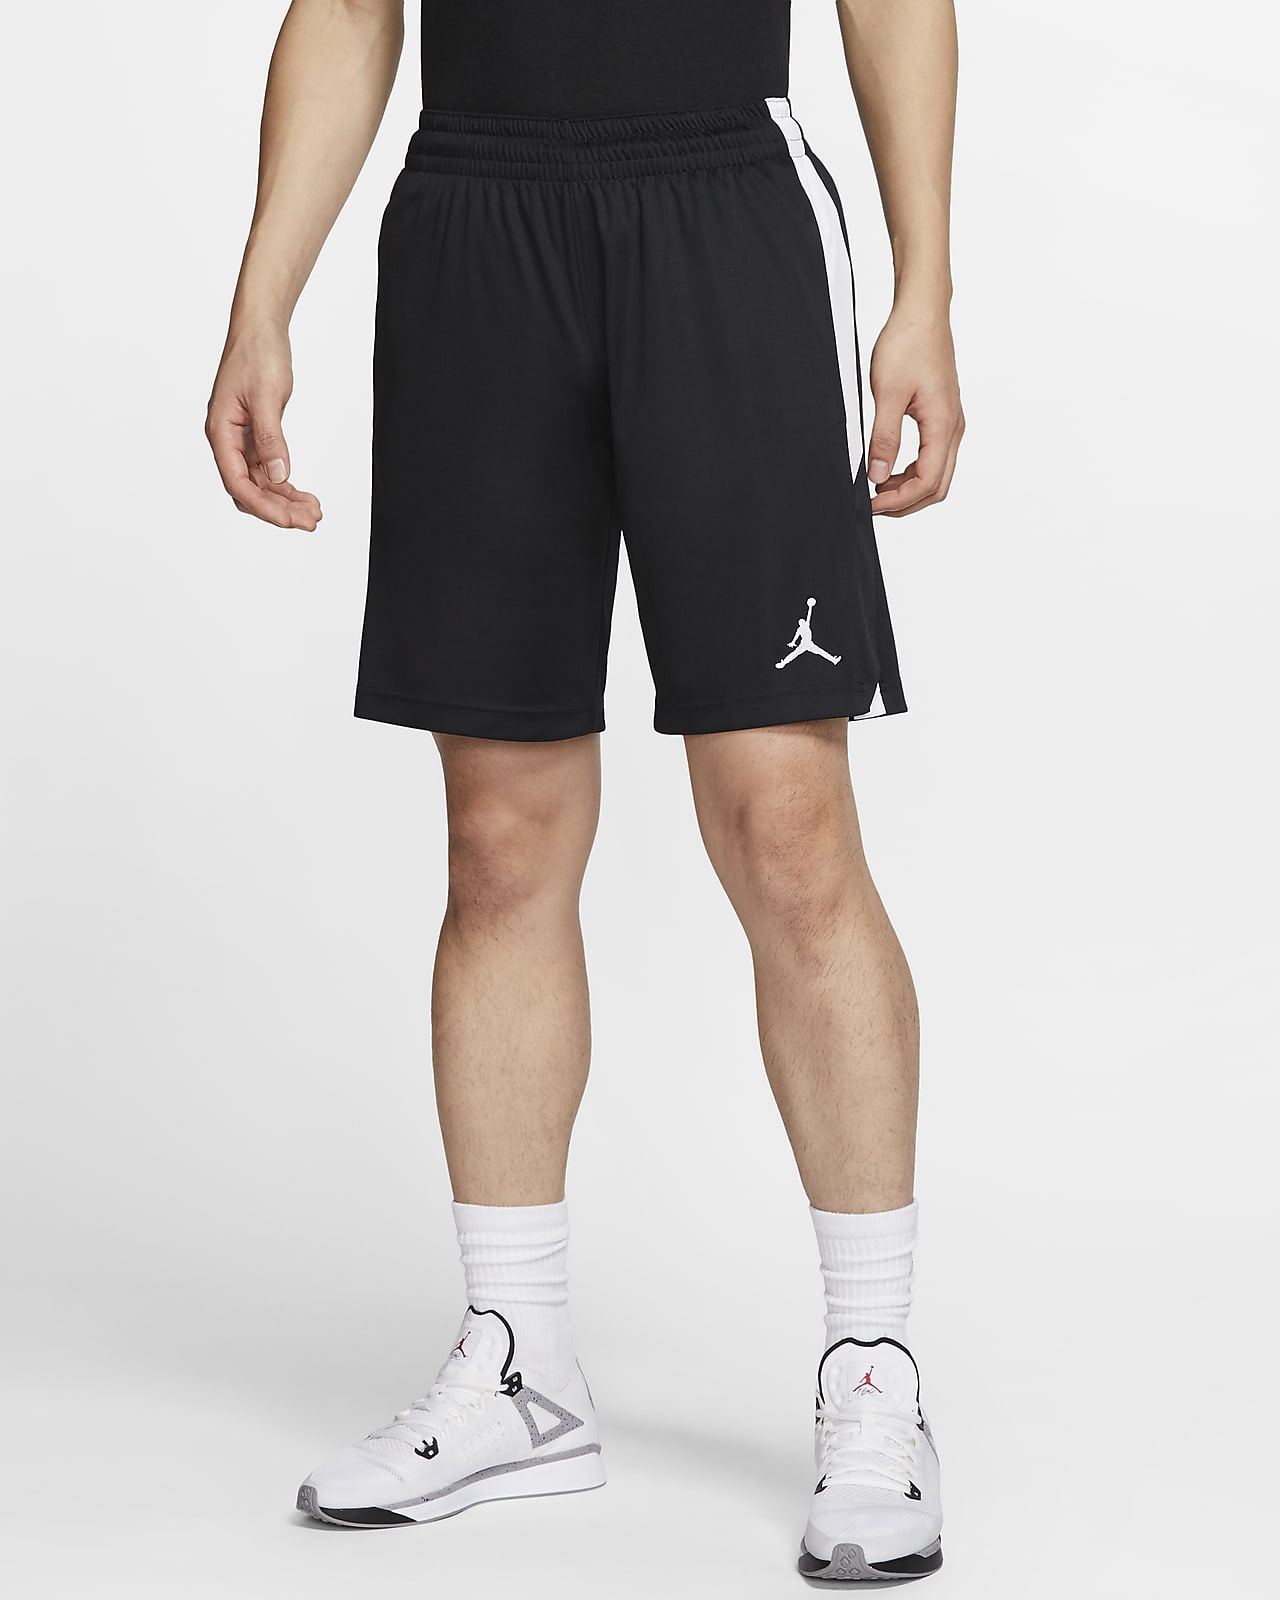 New Jordan Shorts Releases Discount Sale, UP TO 68% OFF | www 